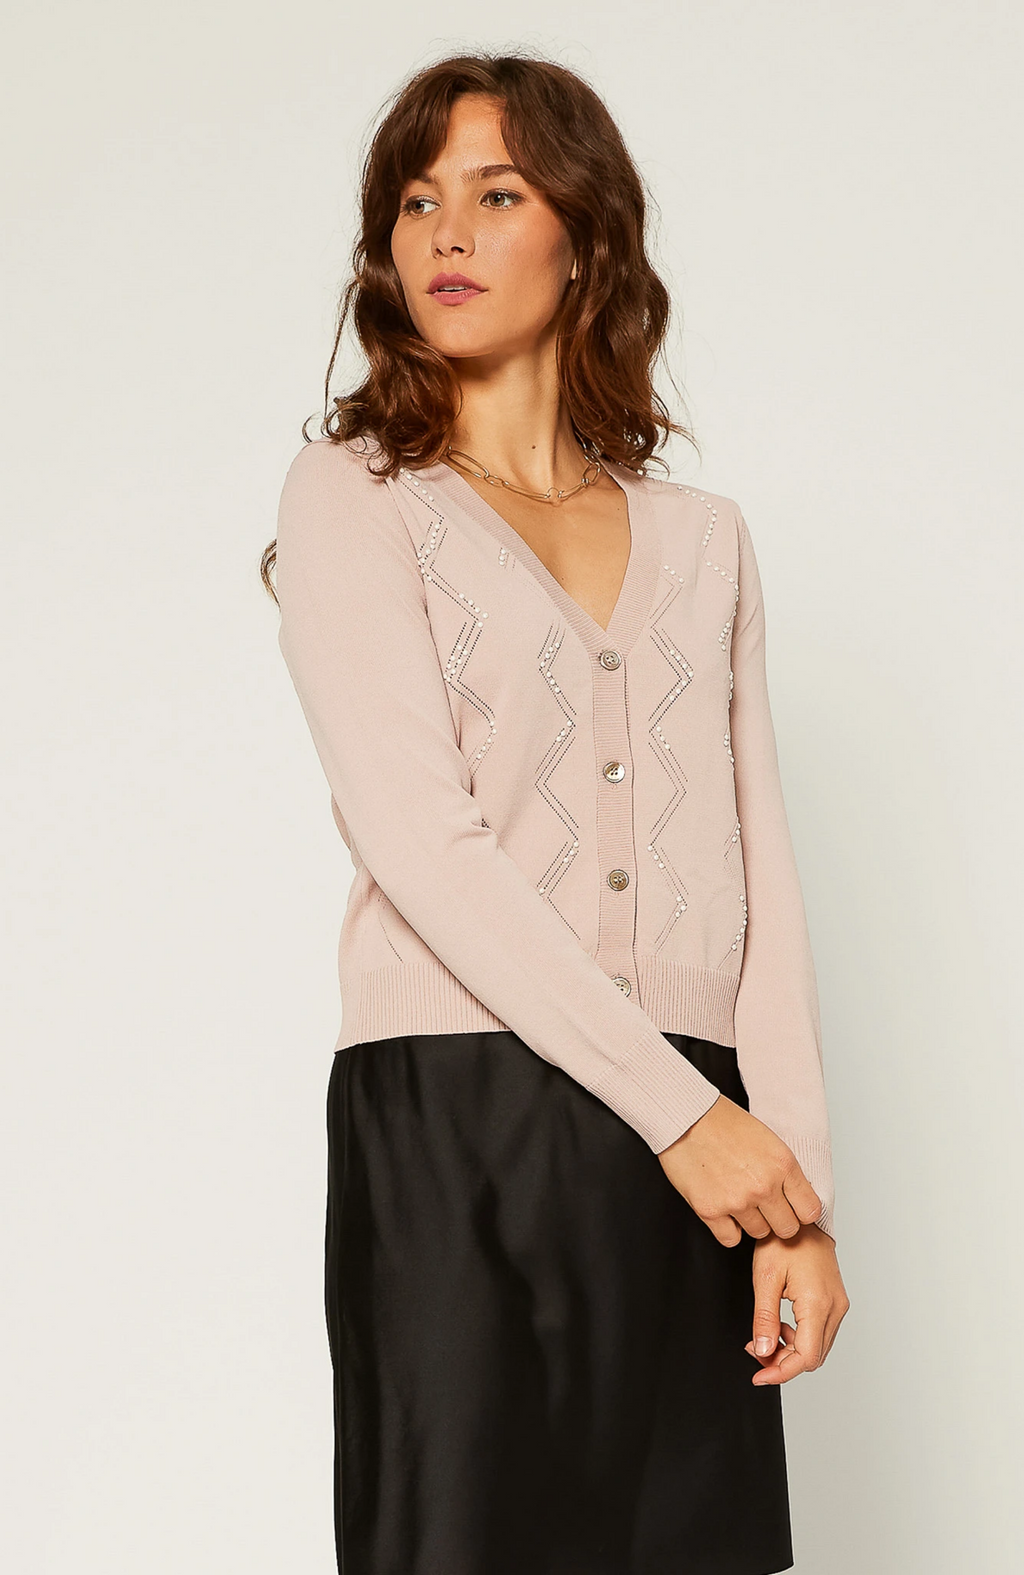 Current Air - Zig Zag Pearl Button Down Cardigan